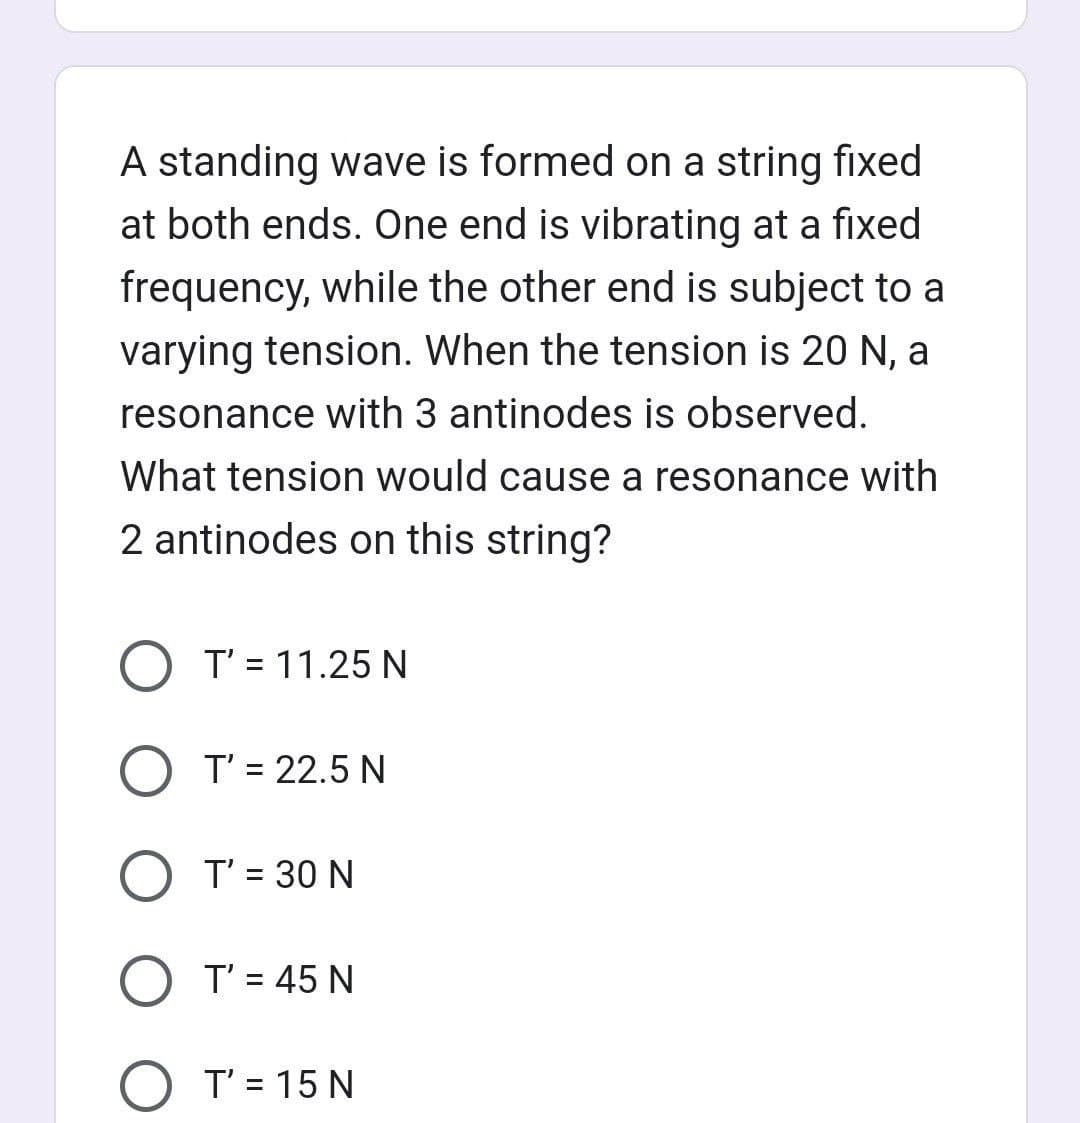 A standing wave is formed on a string fixed
at both ends. One end is vibrating at a fixed
frequency, while the other end is subject to a
varying tension. When the tension is 20 N, a
resonance with 3 antinodes is observed.
What tension would cause a resonance with
2 antinodes on this string?
O T' = 11.25 N
T' = 22.5 N
O T' = 30 N
O T' = 45 N
T' = 15 N